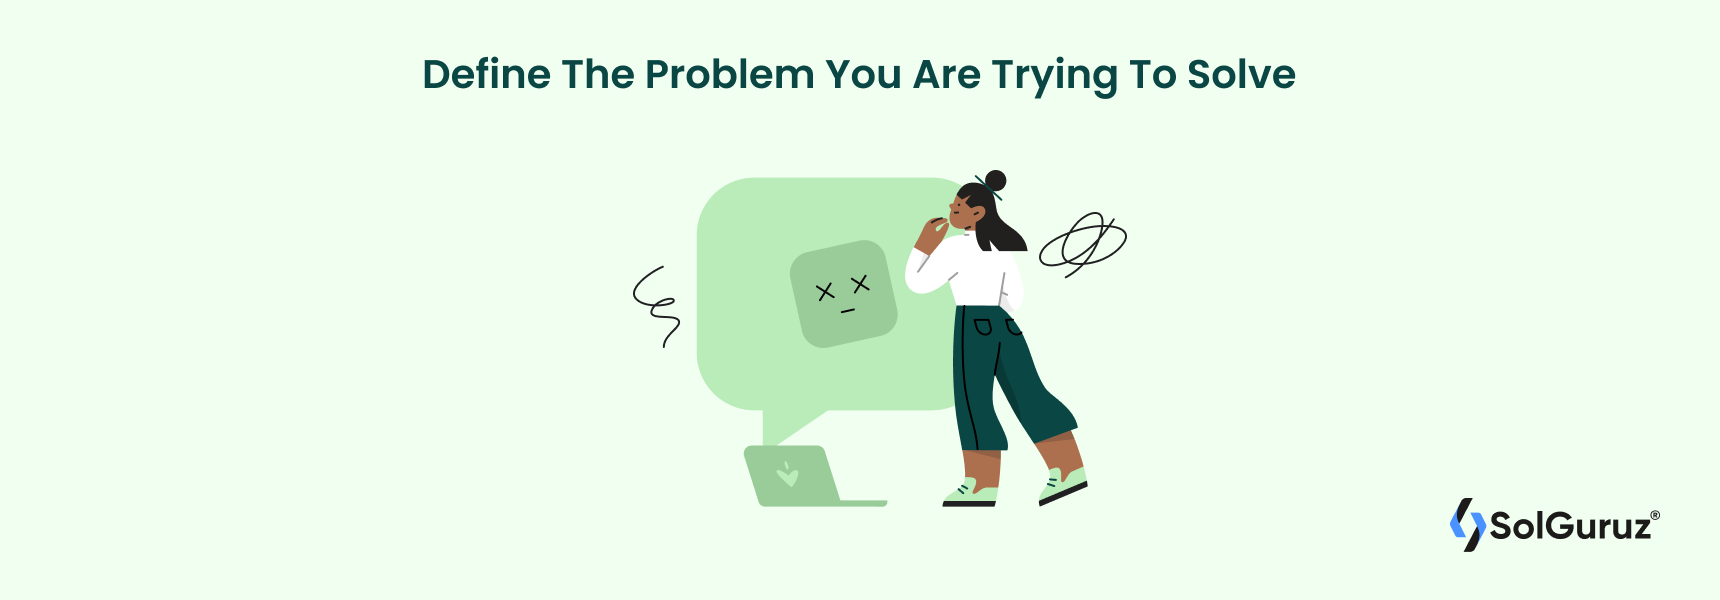 Define The Problem You Are Trying To Solve